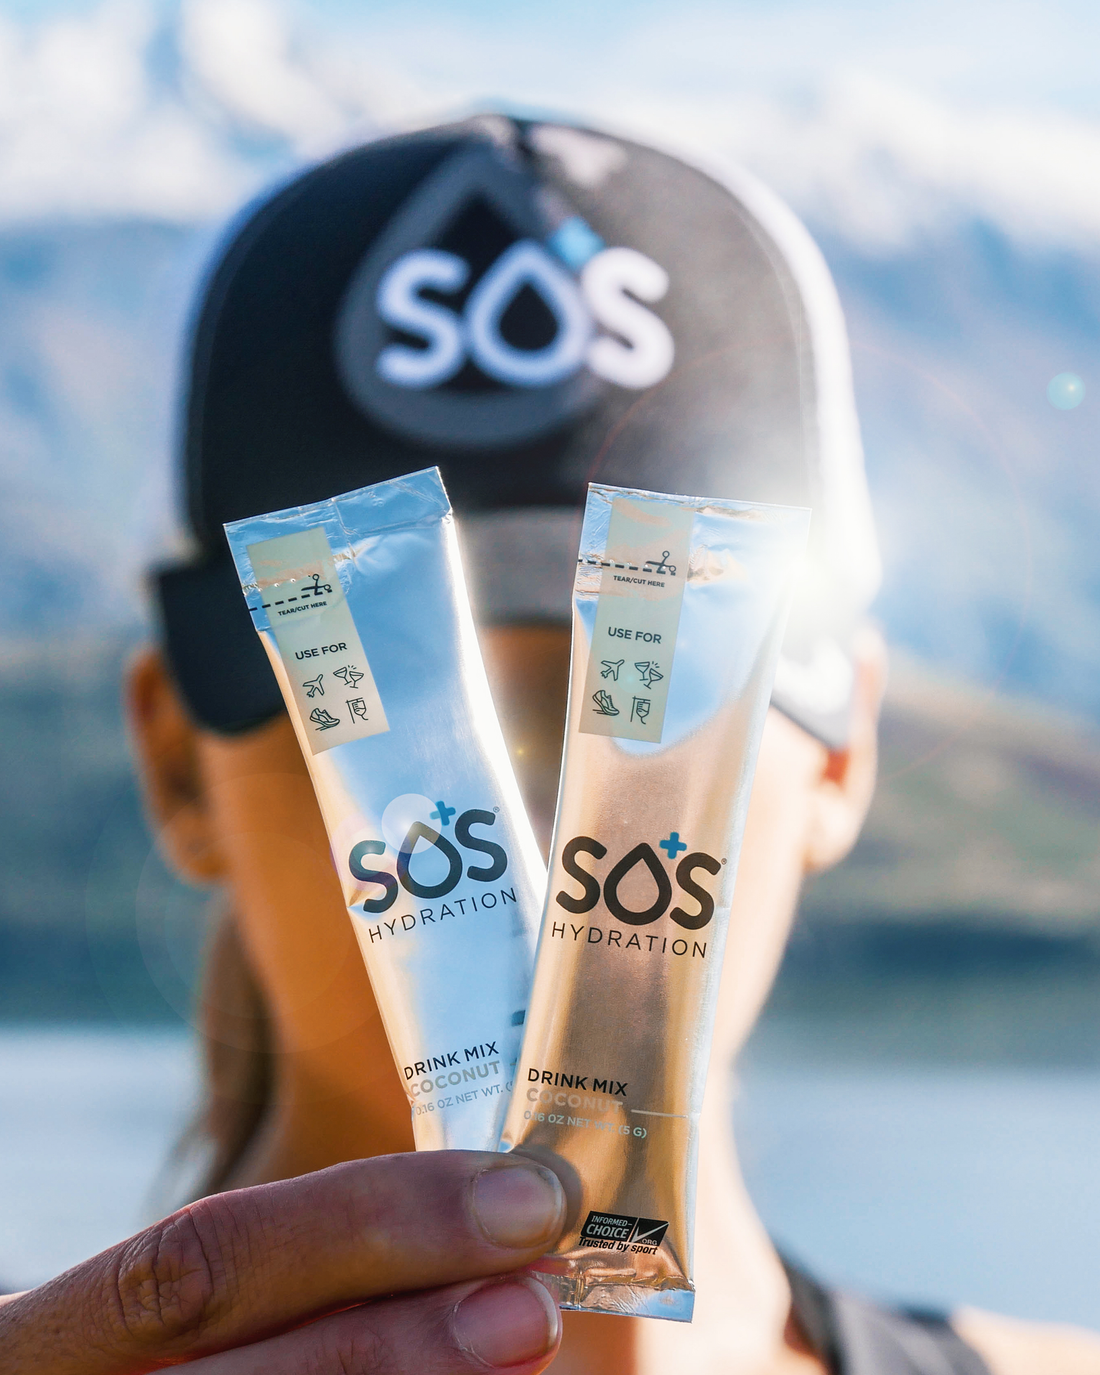 With Every Purchase, SOS Will Donate 2 Servings of It's Electrolyte Mix To Hospitals.